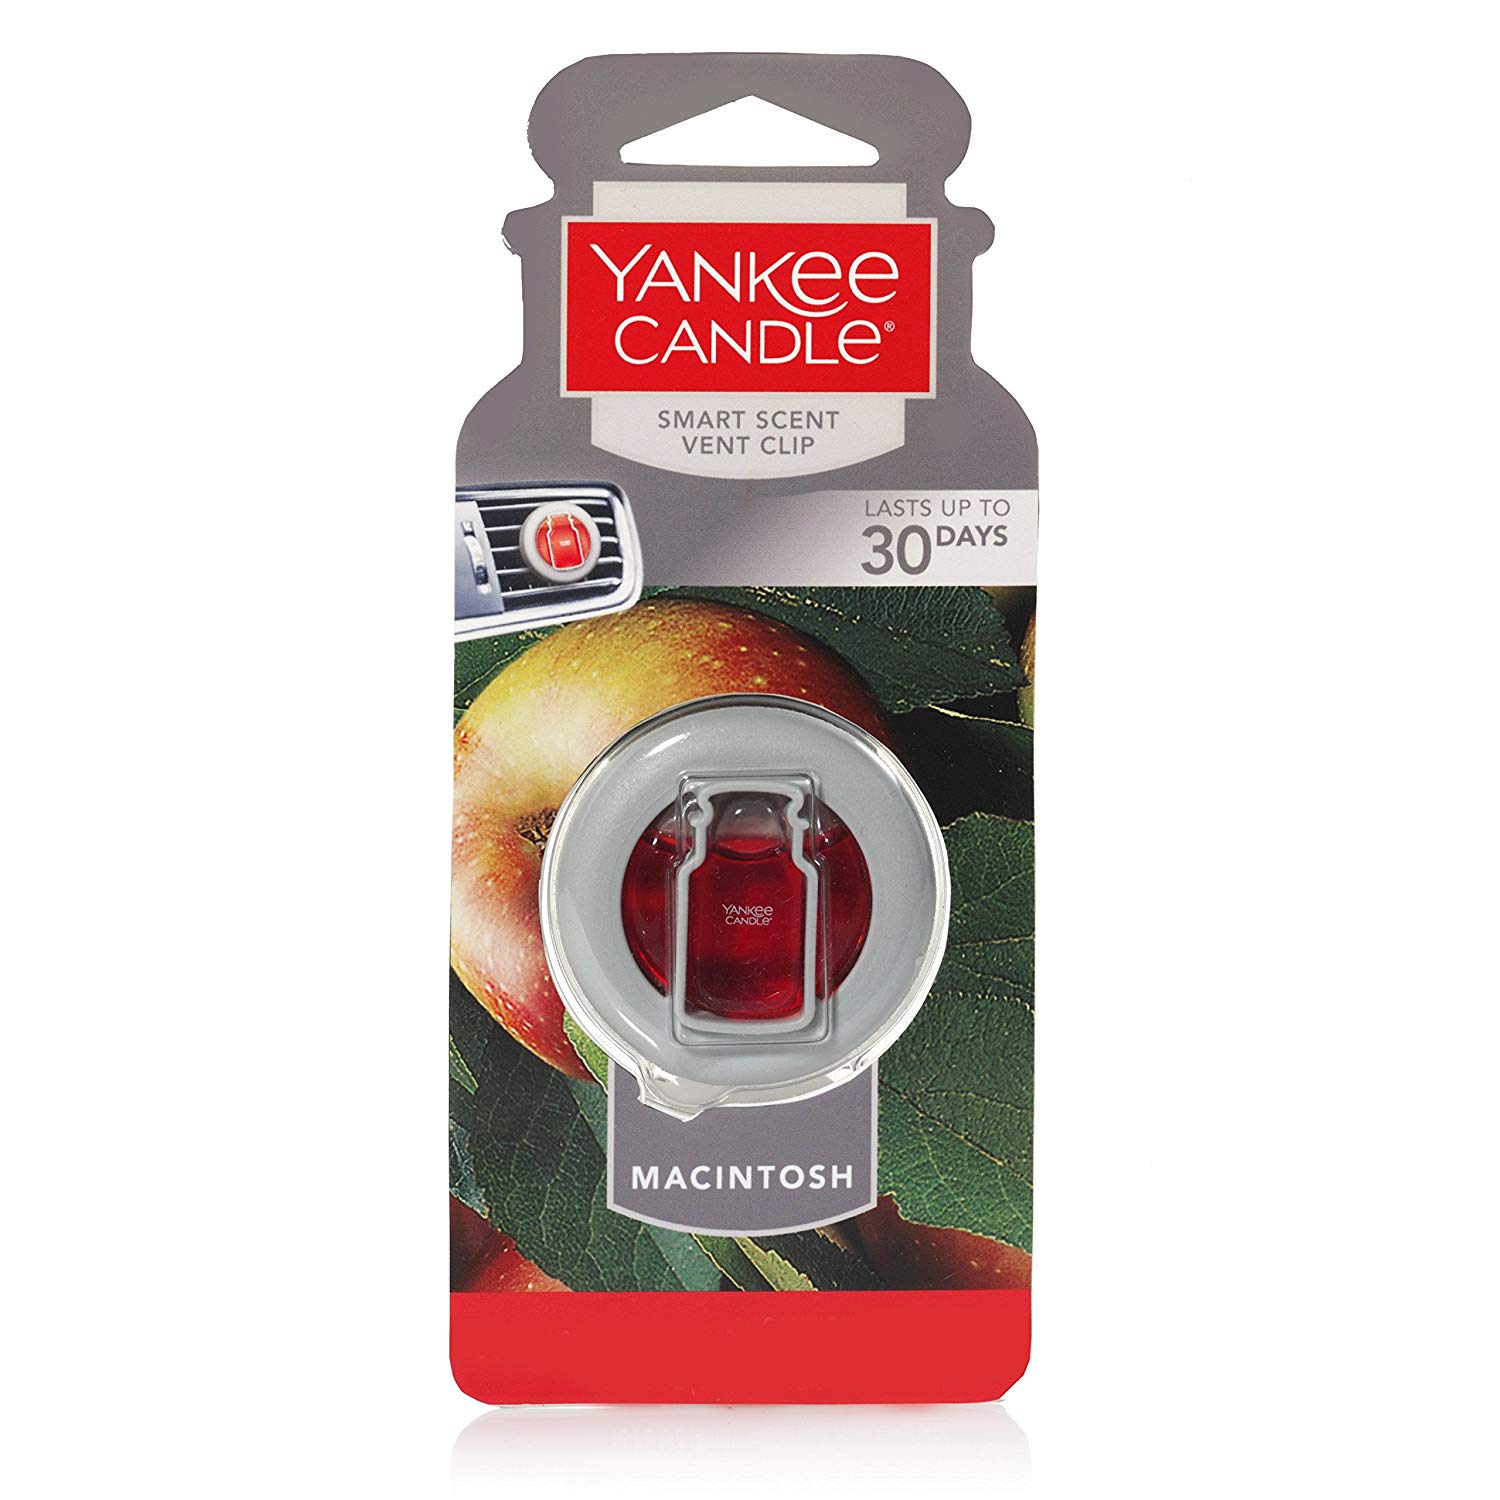 1304392: SMART SCENT VENT CLIP AIR FRESHENER - MACINTOSH - YANKEE CANDLE